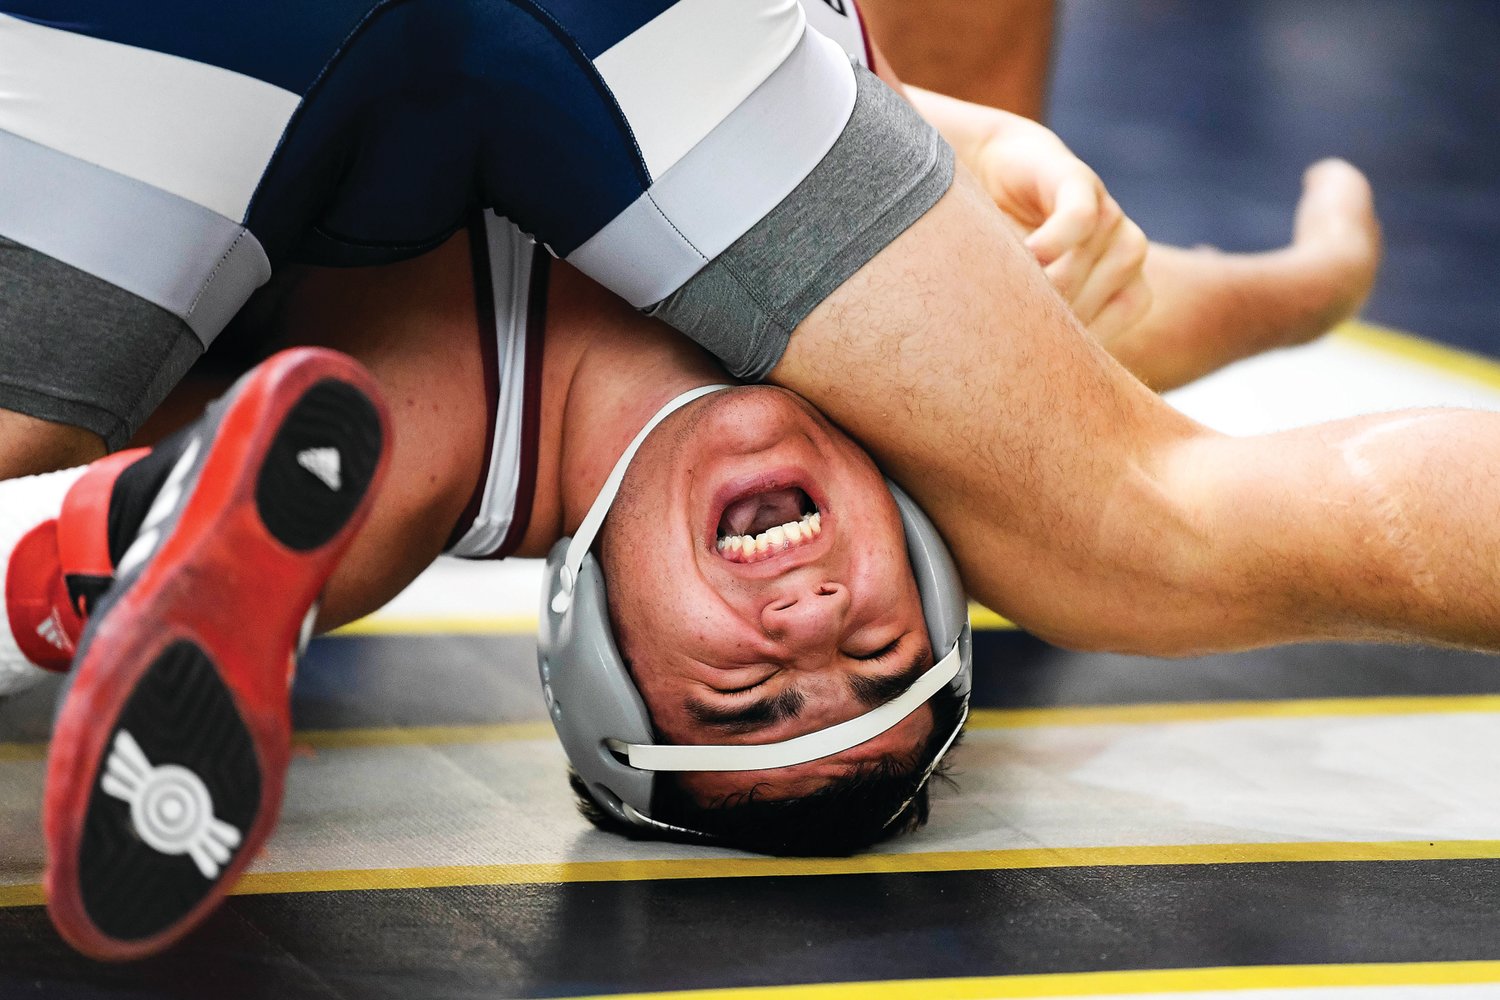 Faith Christian Academy’s Jason Singer tries to break the hold of Nick Wehmeyer of Malvern Prep during a 189-pound match.